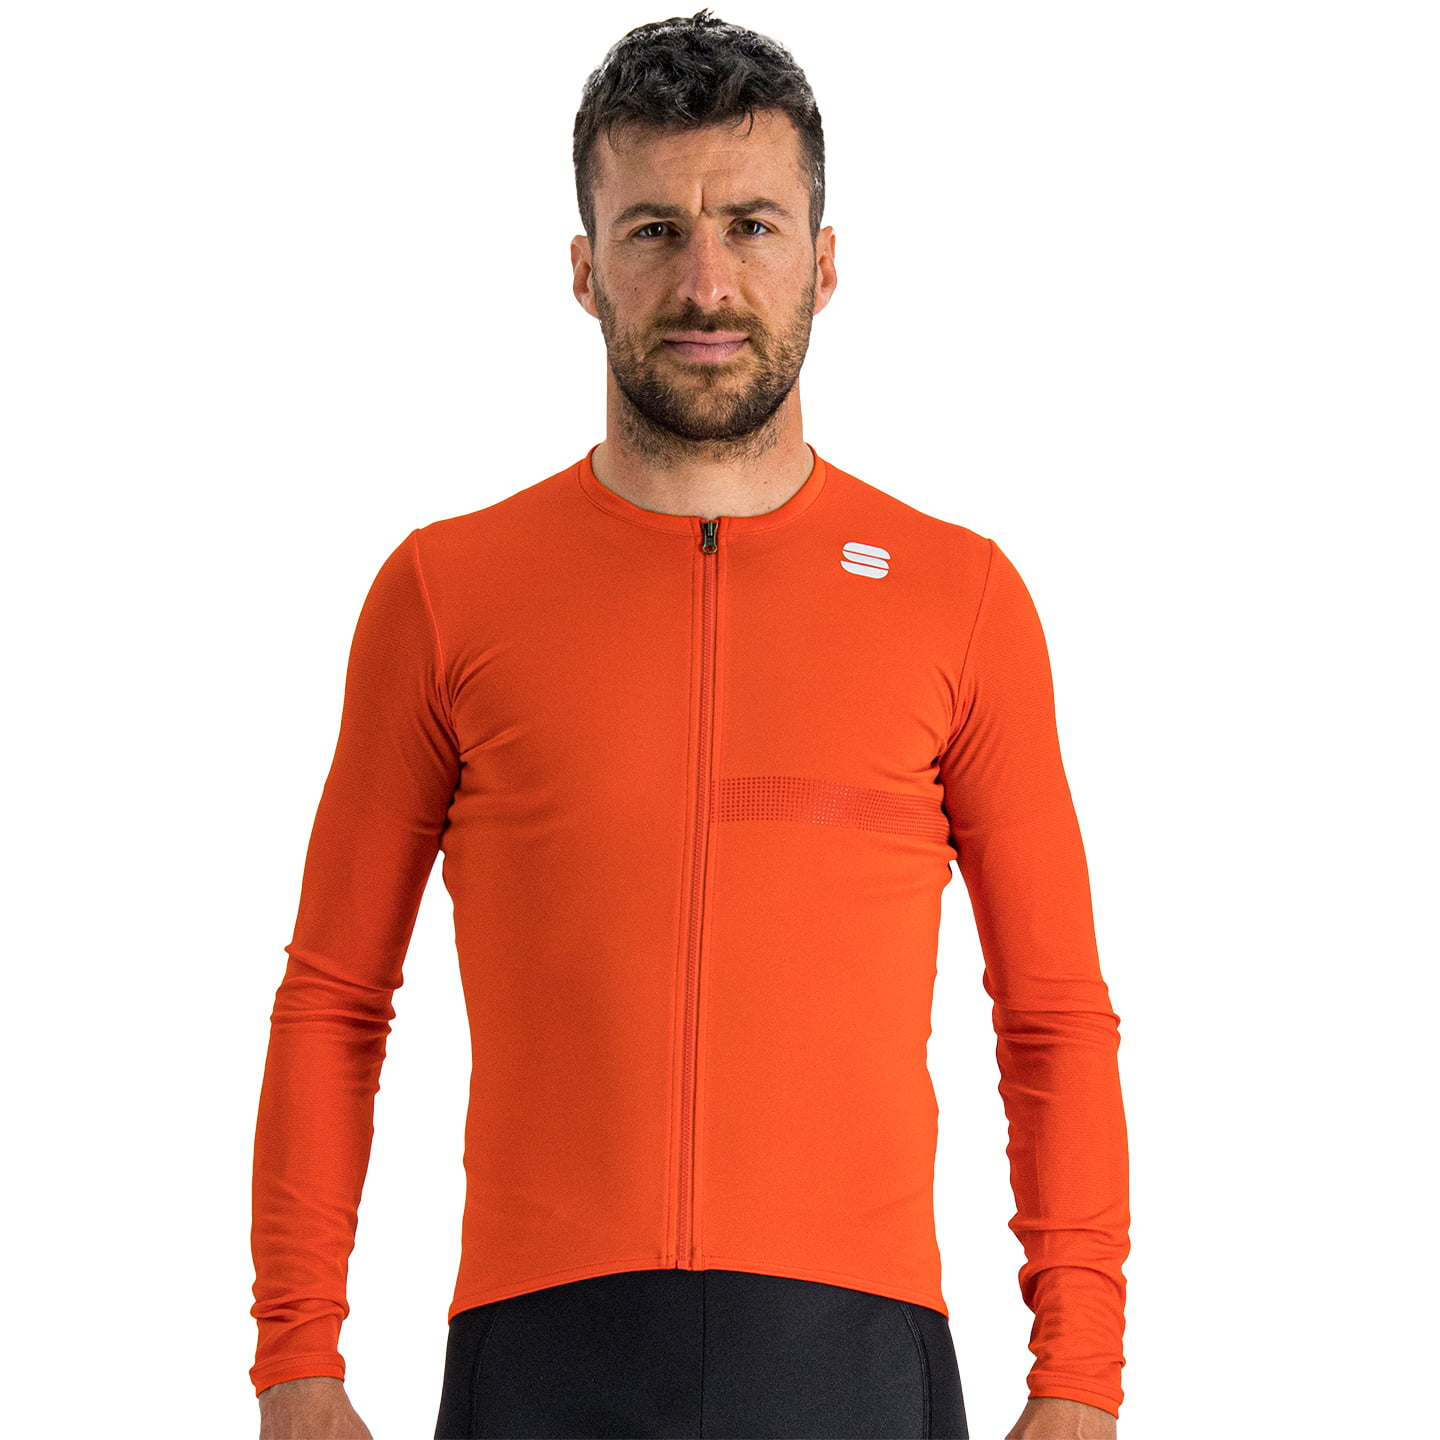 SPORTFUL Matchy Long Sleeve Jersey Long Sleeve Jersey, for men, size L, Cycling jersey, Cycling clothing